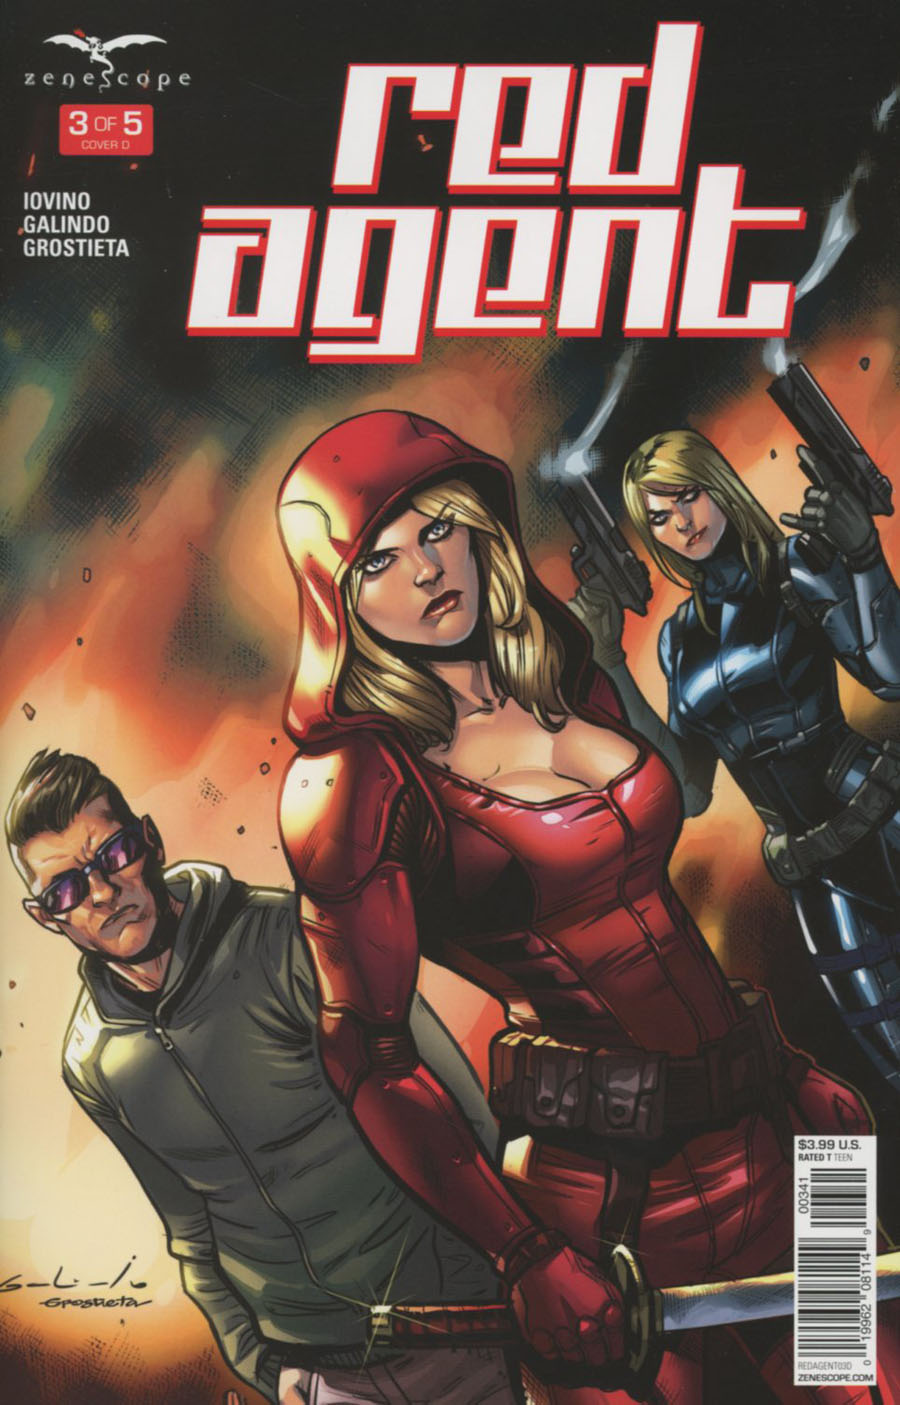 Grimm Fairy Tales Presents Red Agent #3 Cover D Diego Galindo